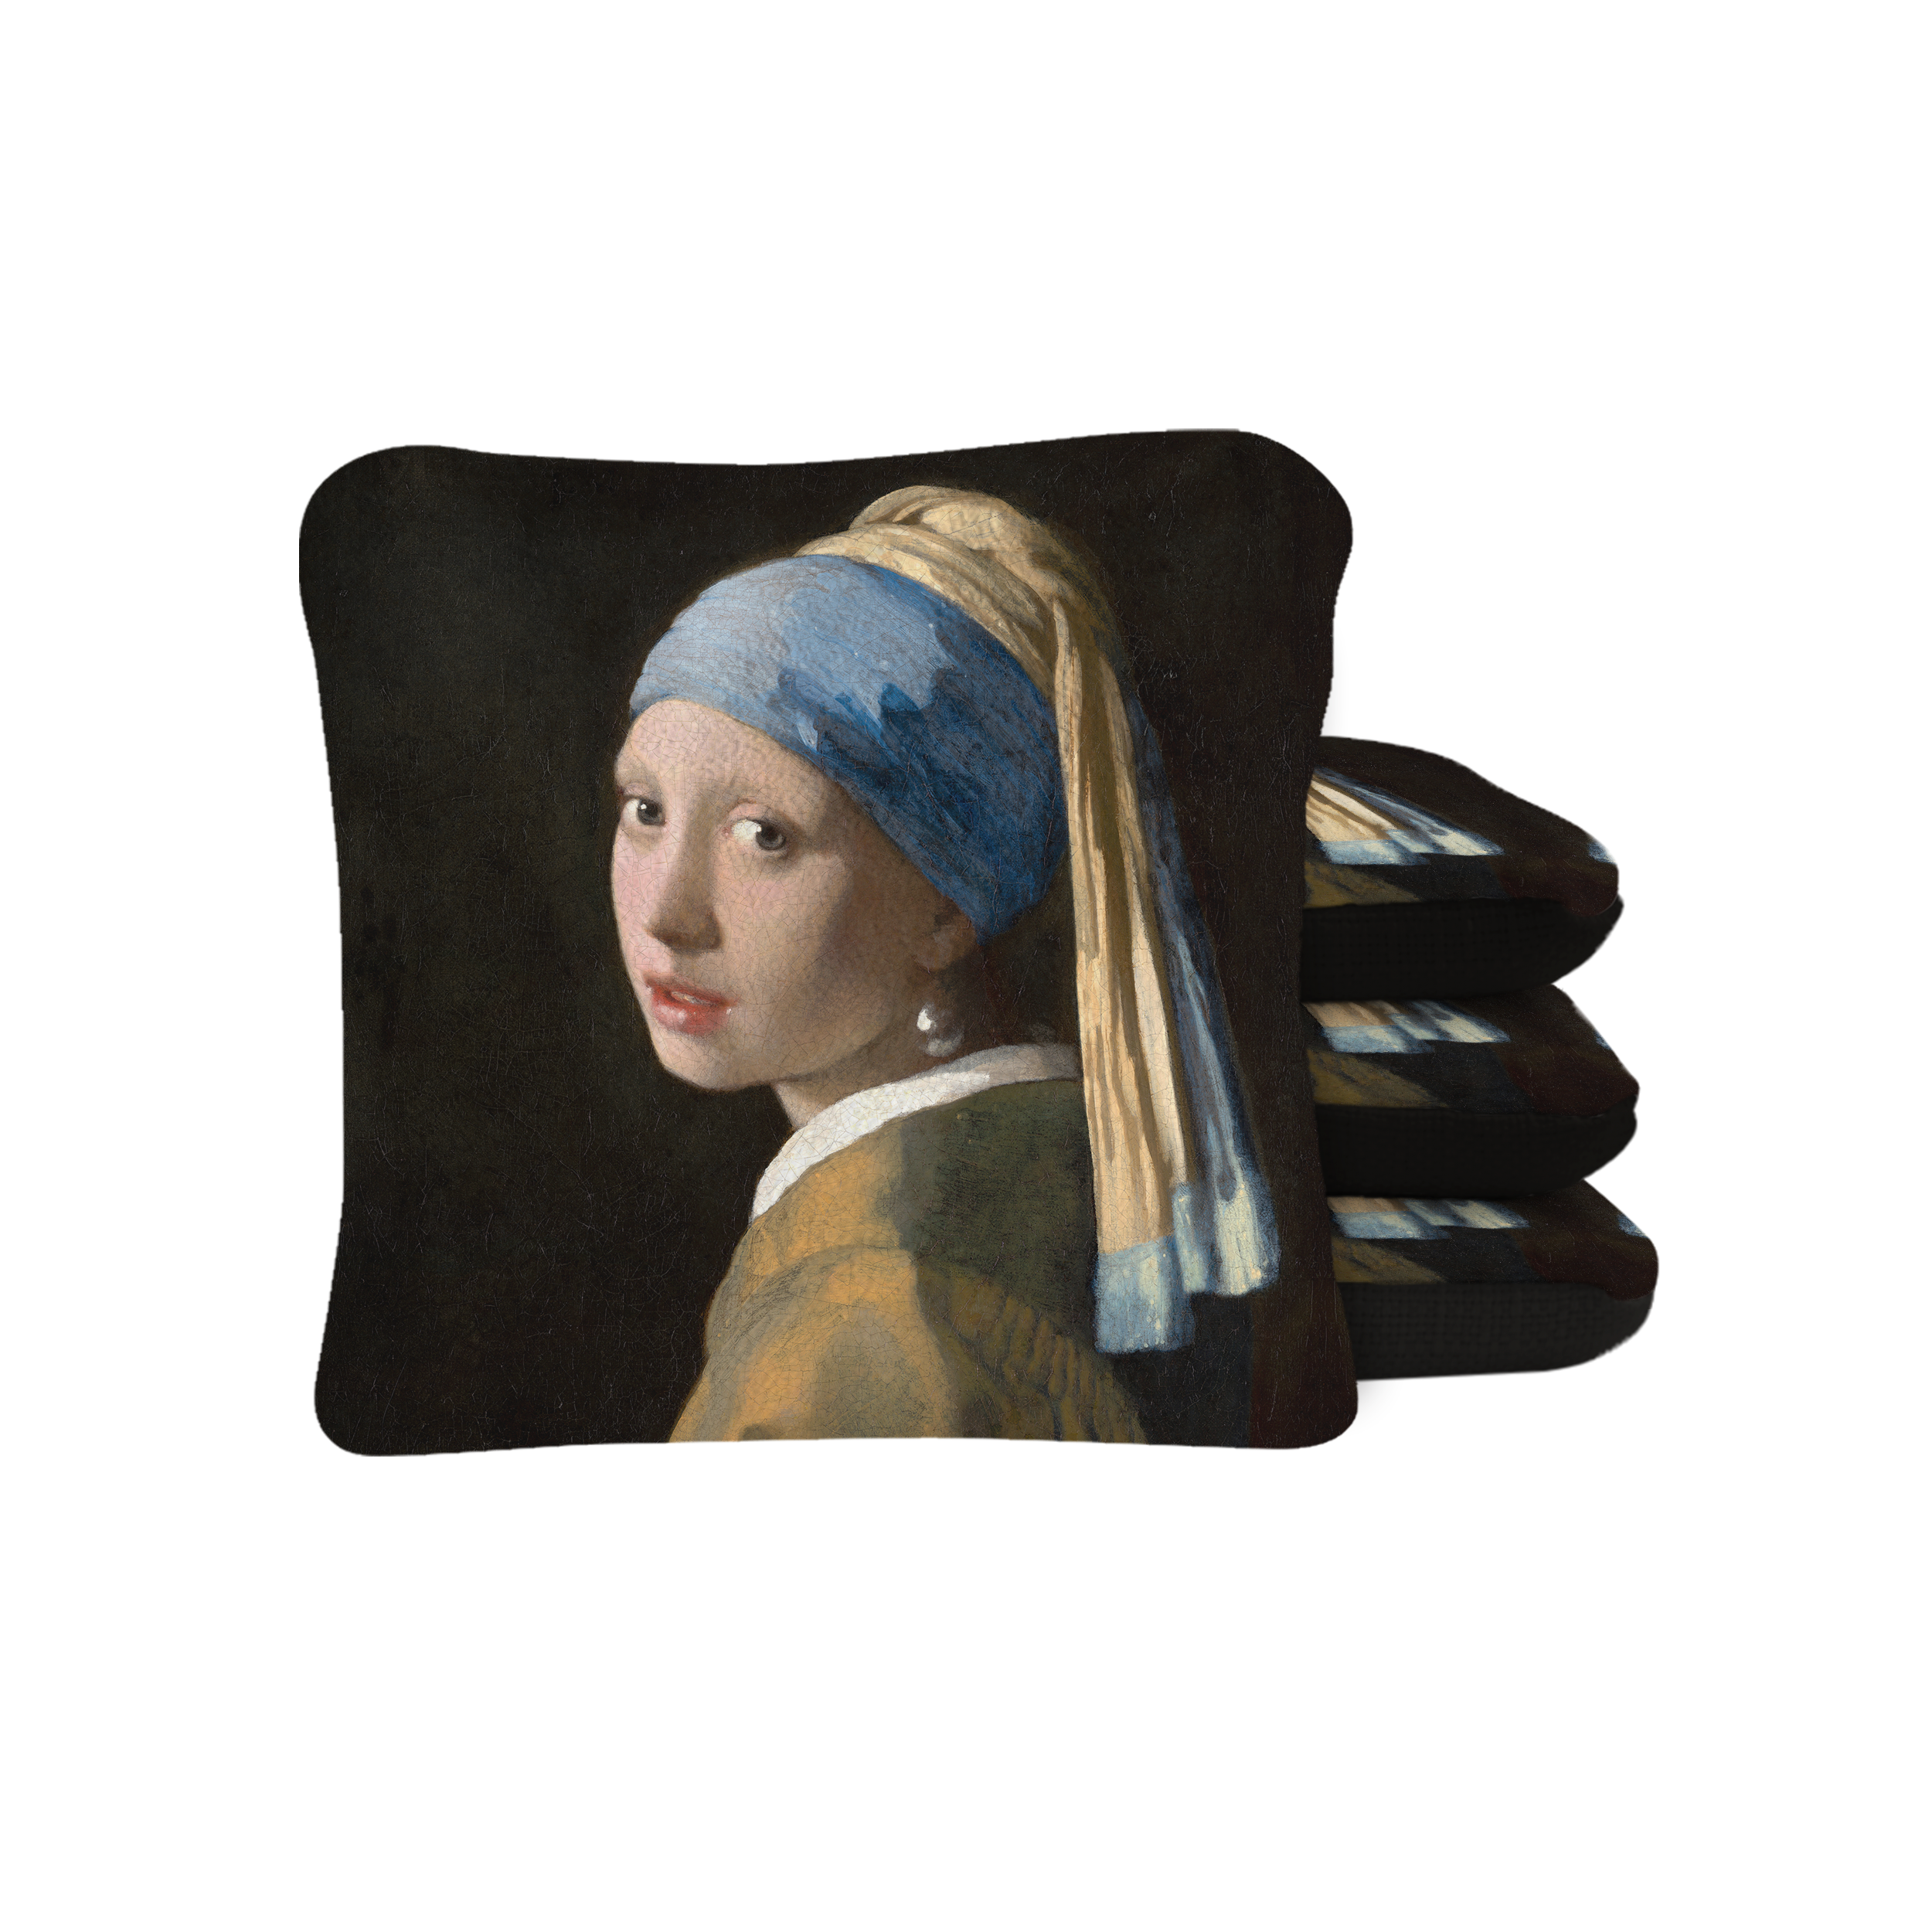 6-in Synergy Pro Vermeer's Girl With Pearl Earring Professional Regulation Cornhole Bags